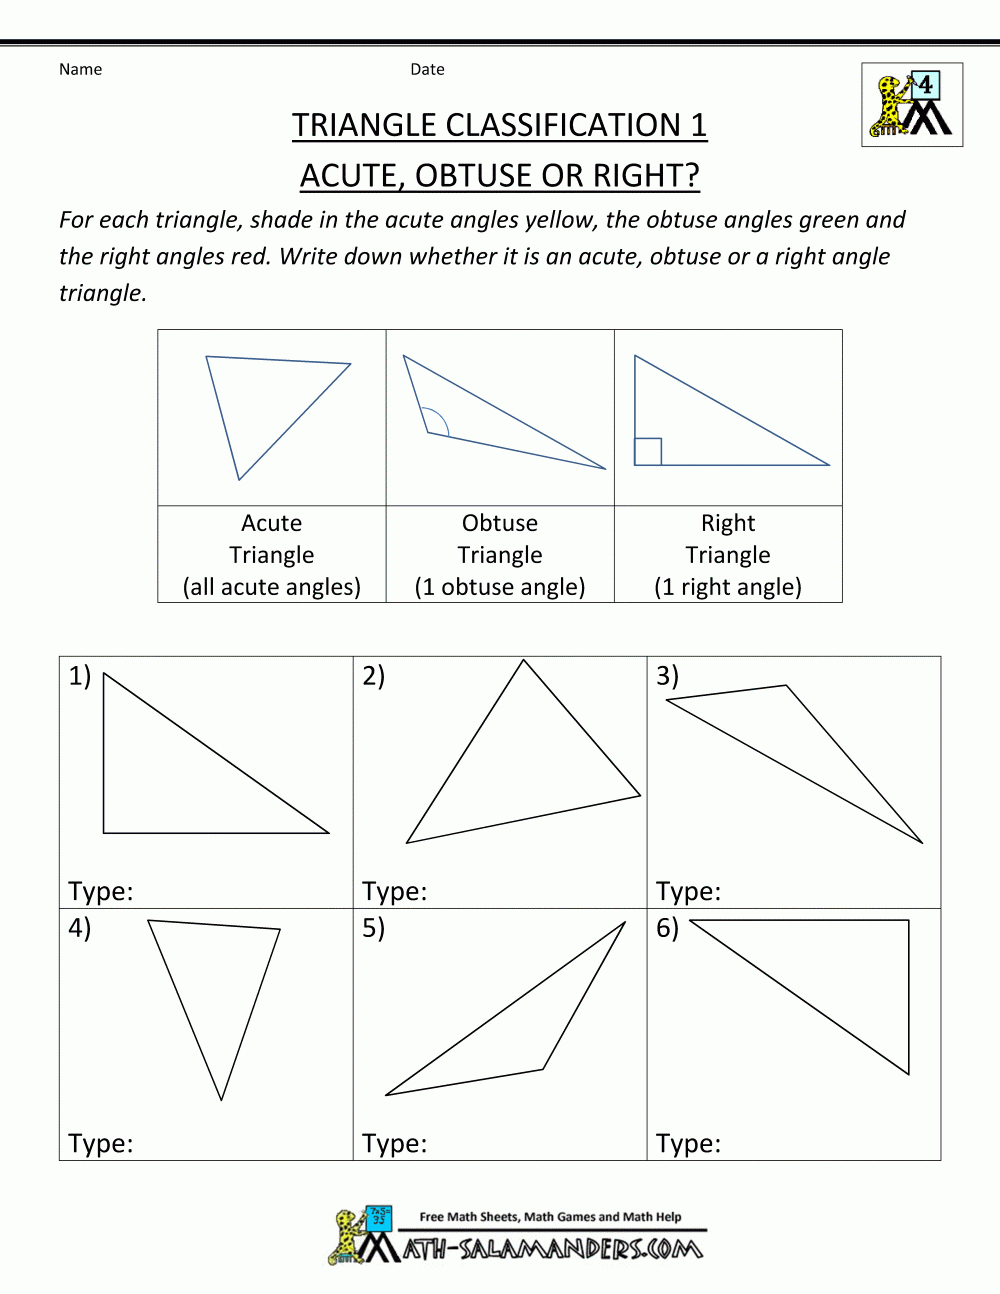 Free 4Th Grade Math Worksheets Triangle Classification 1 | Geometry - Free Printable Fun Math Worksheets For 4Th Grade